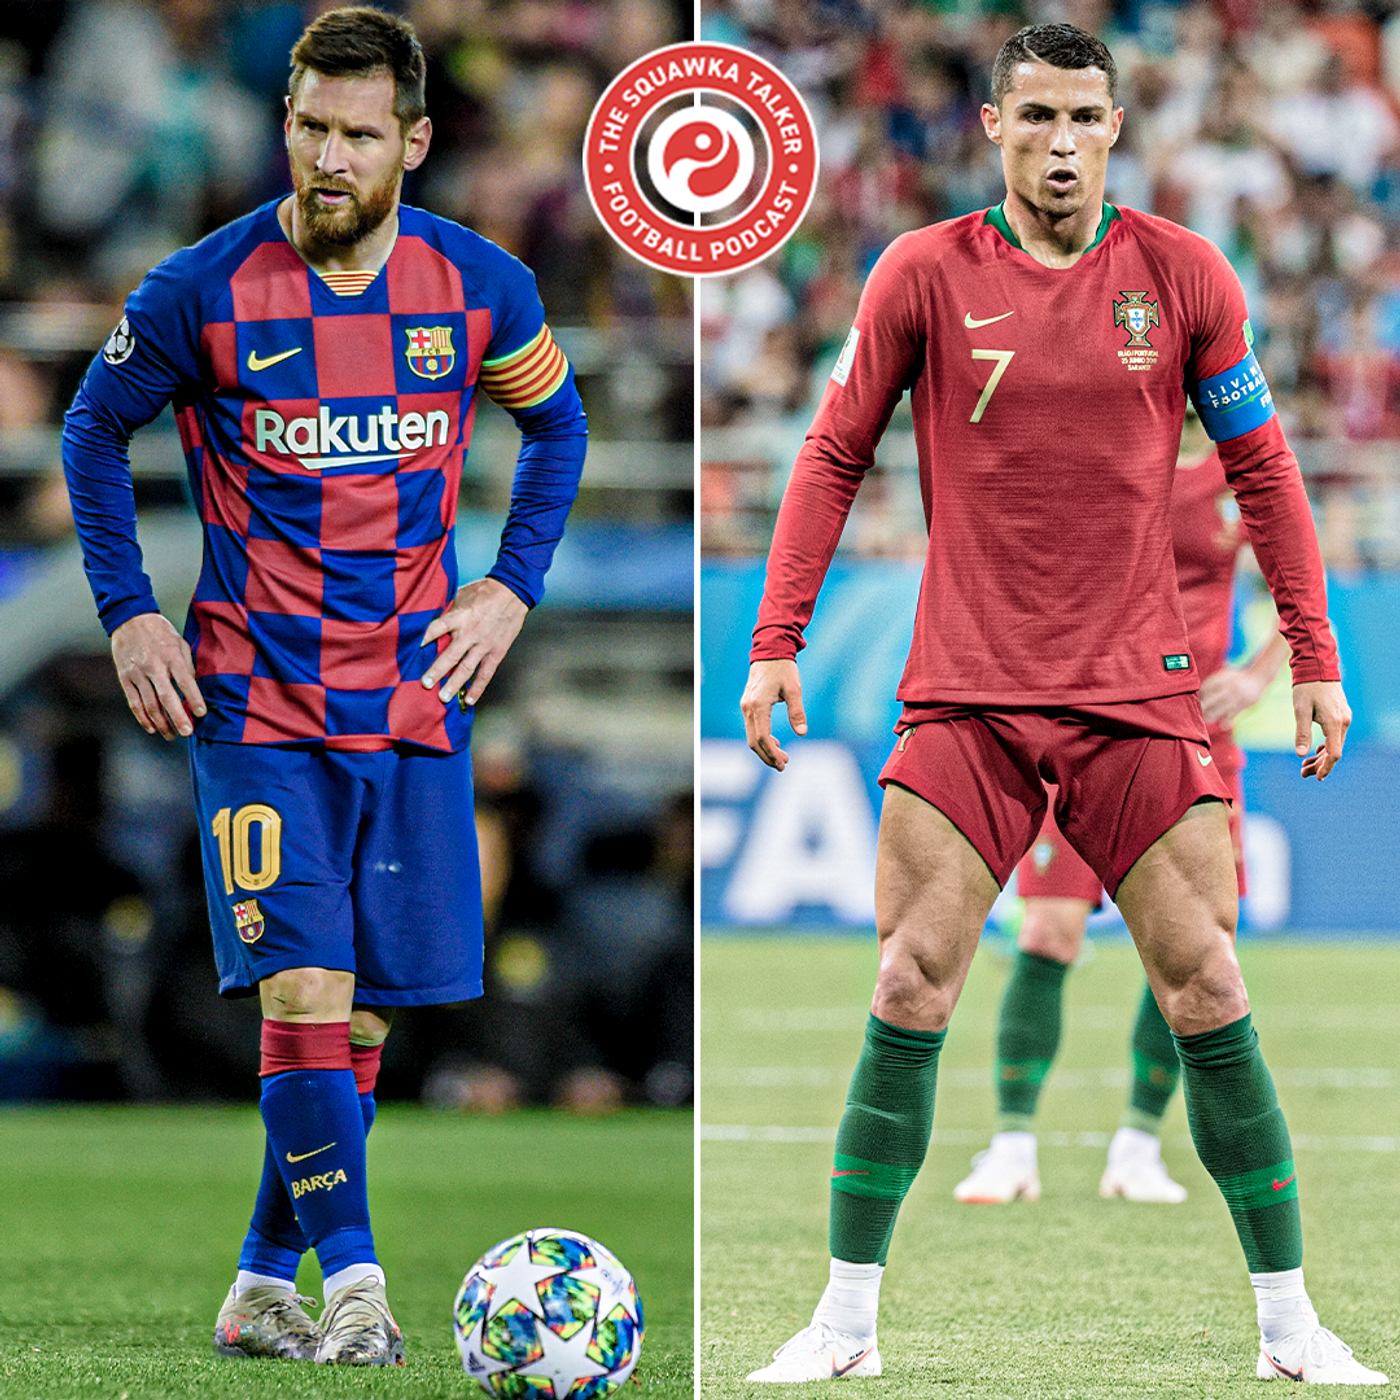 Explained: the science behind Messi and Ronaldo's free-kicks